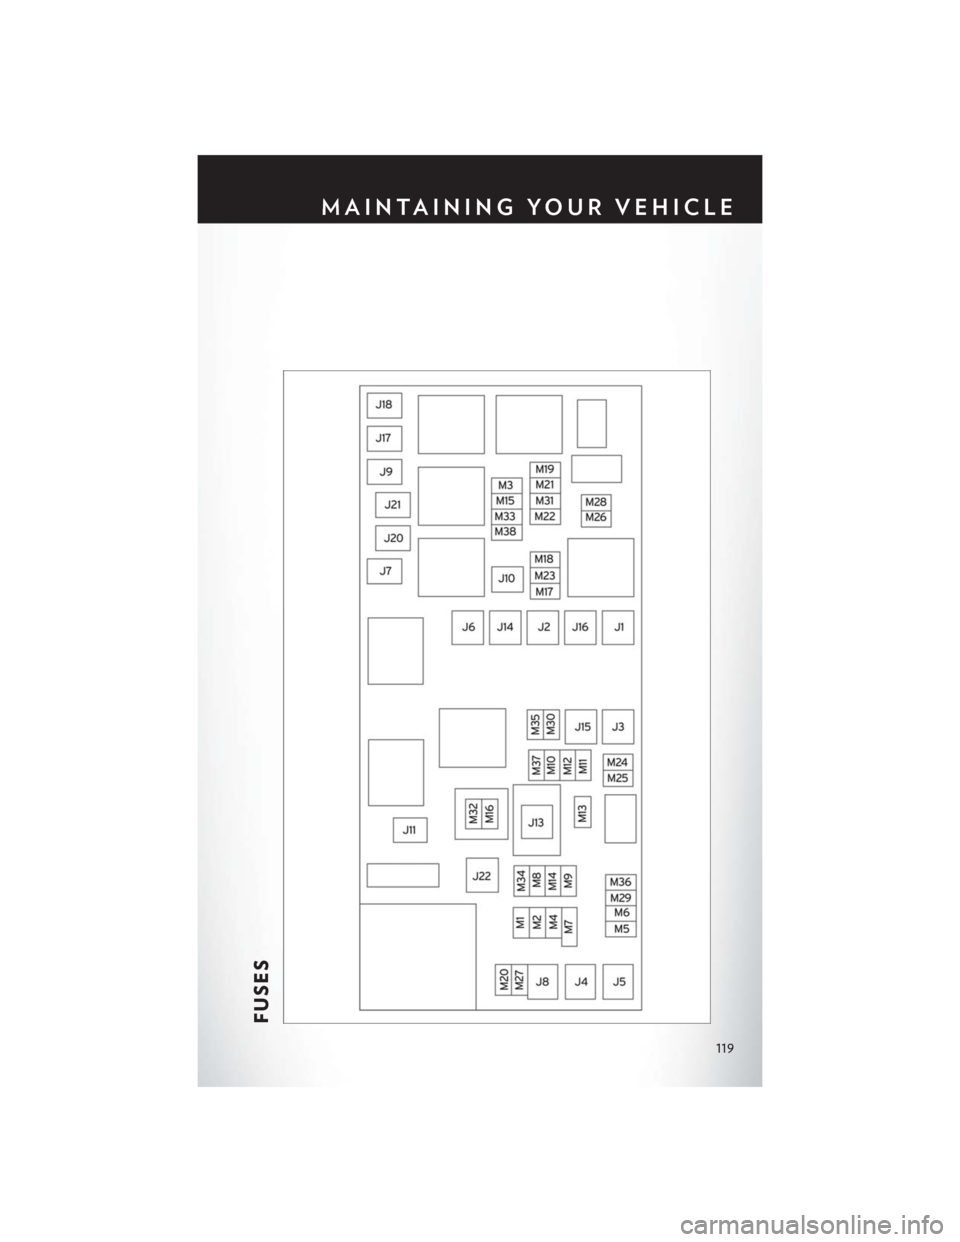 CHRYSLER TOWN AND COUNTRY 2013 5.G User Guide FUSES
MAINTAINING YOUR VEHICLE
119 